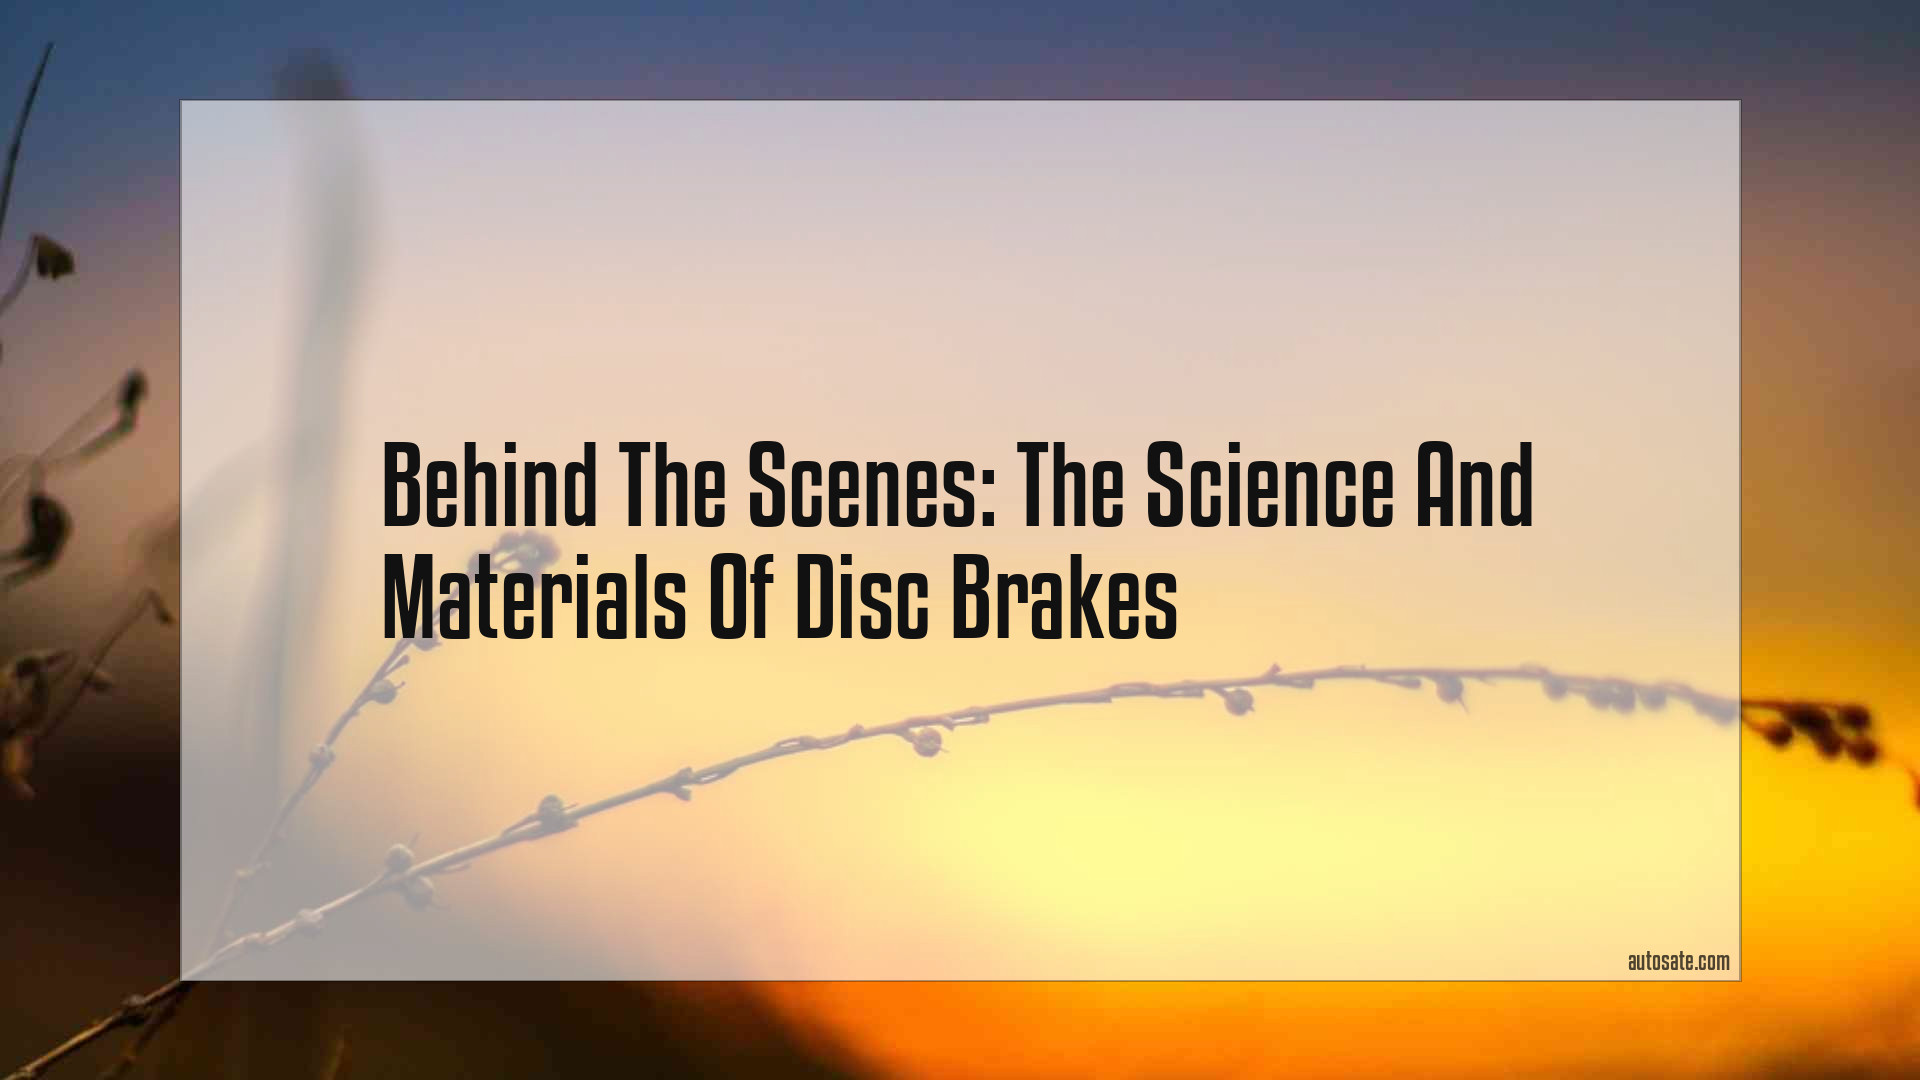 Behind The Scenes: The Science And Materials Of Disc Brakes